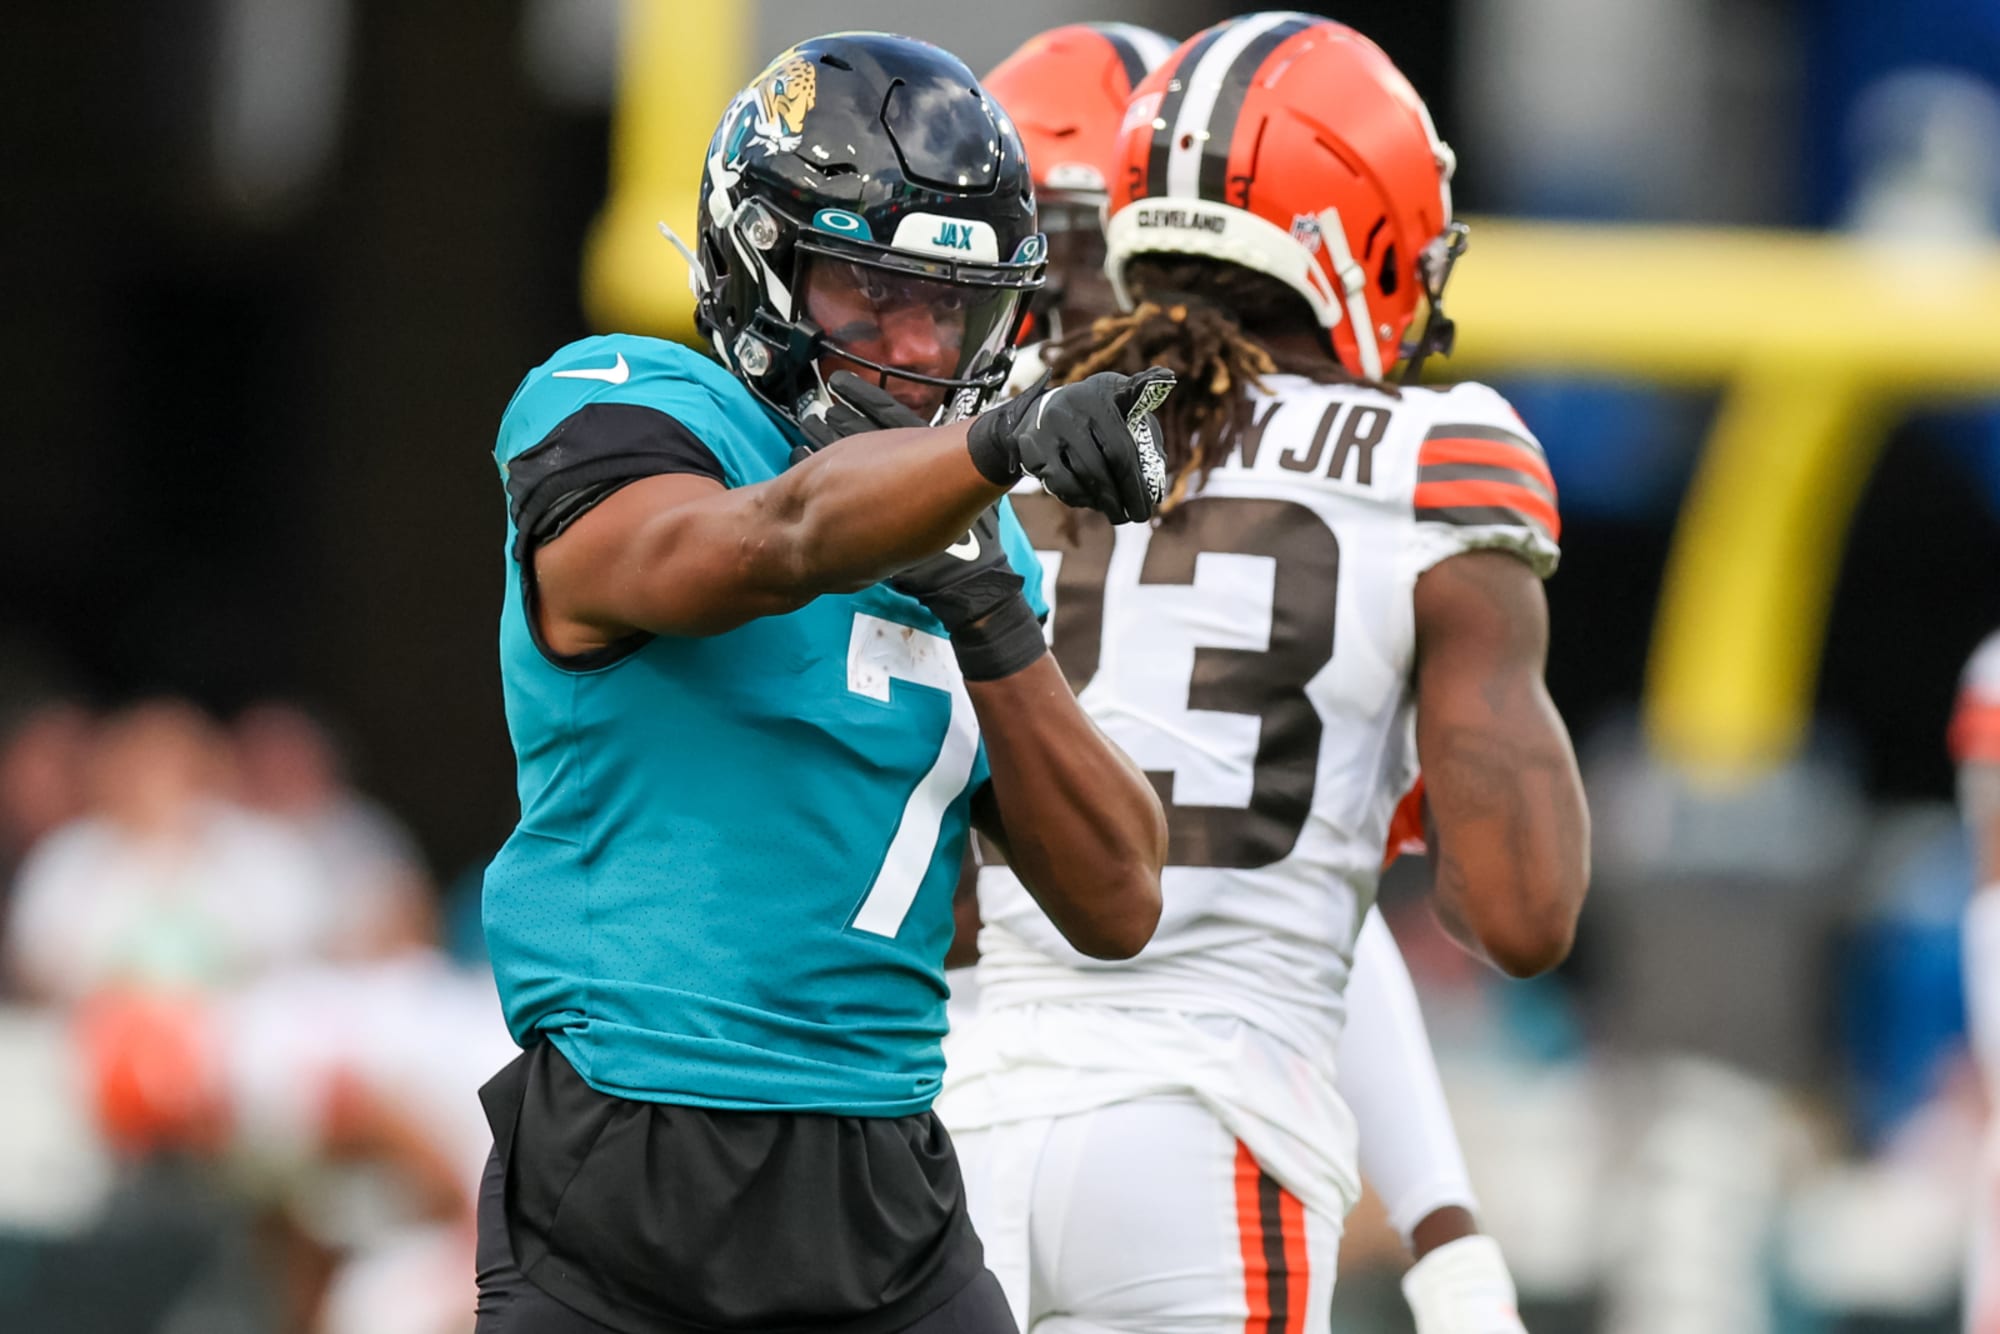 Jaguars WR Zay Jones felt energy from team and crowd after catch